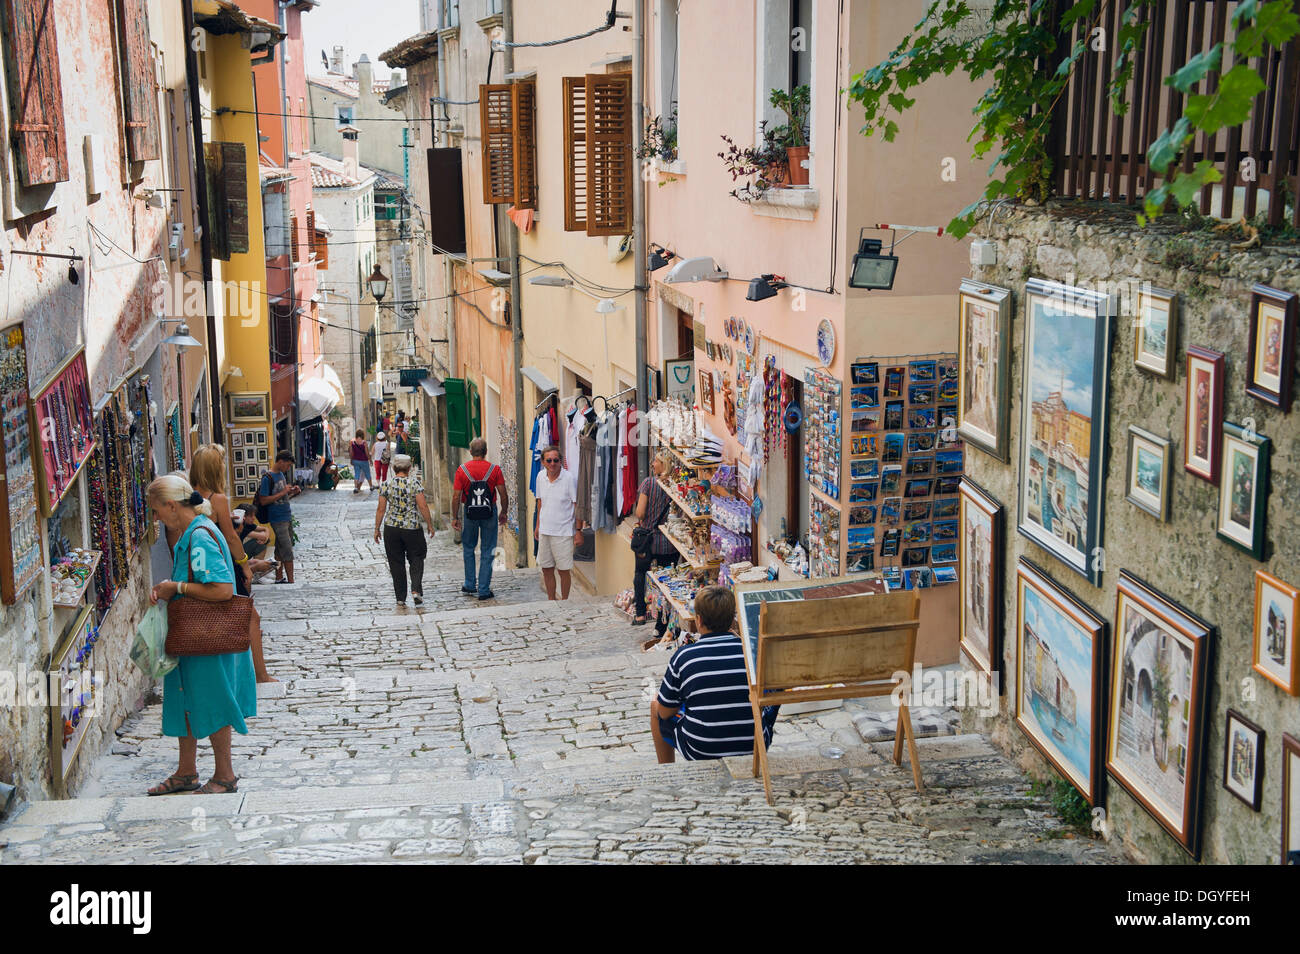 Tourists in an alley in the historic town centre with souvenir items, Rovinj, Istria, Croatia, Europe Stock Photo